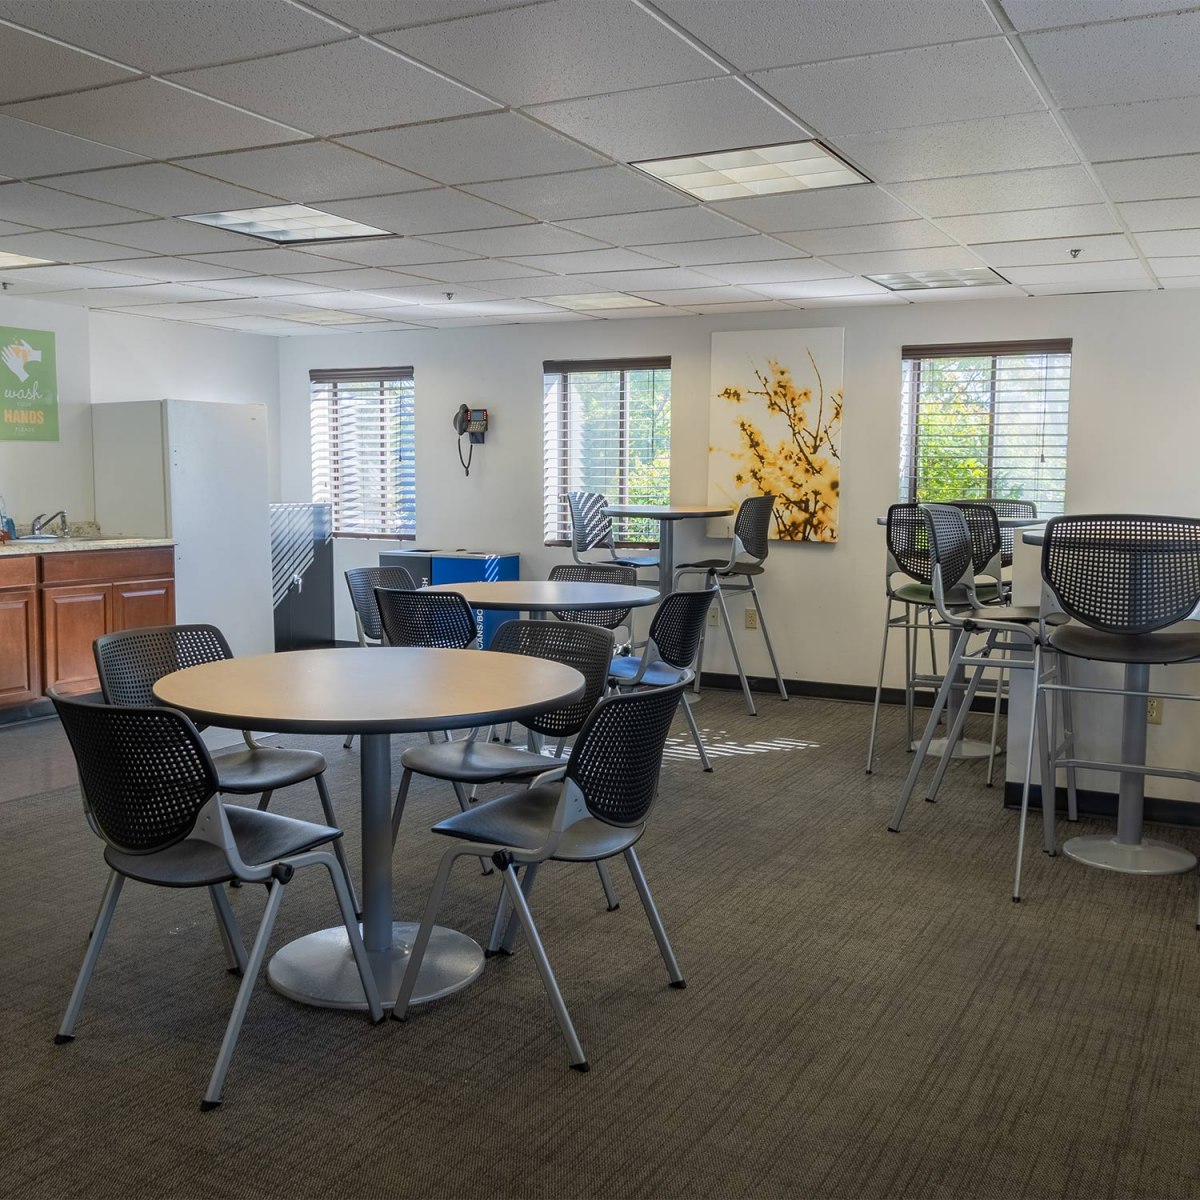 Take a virtual tour of CFM’s exceptional learning environment.